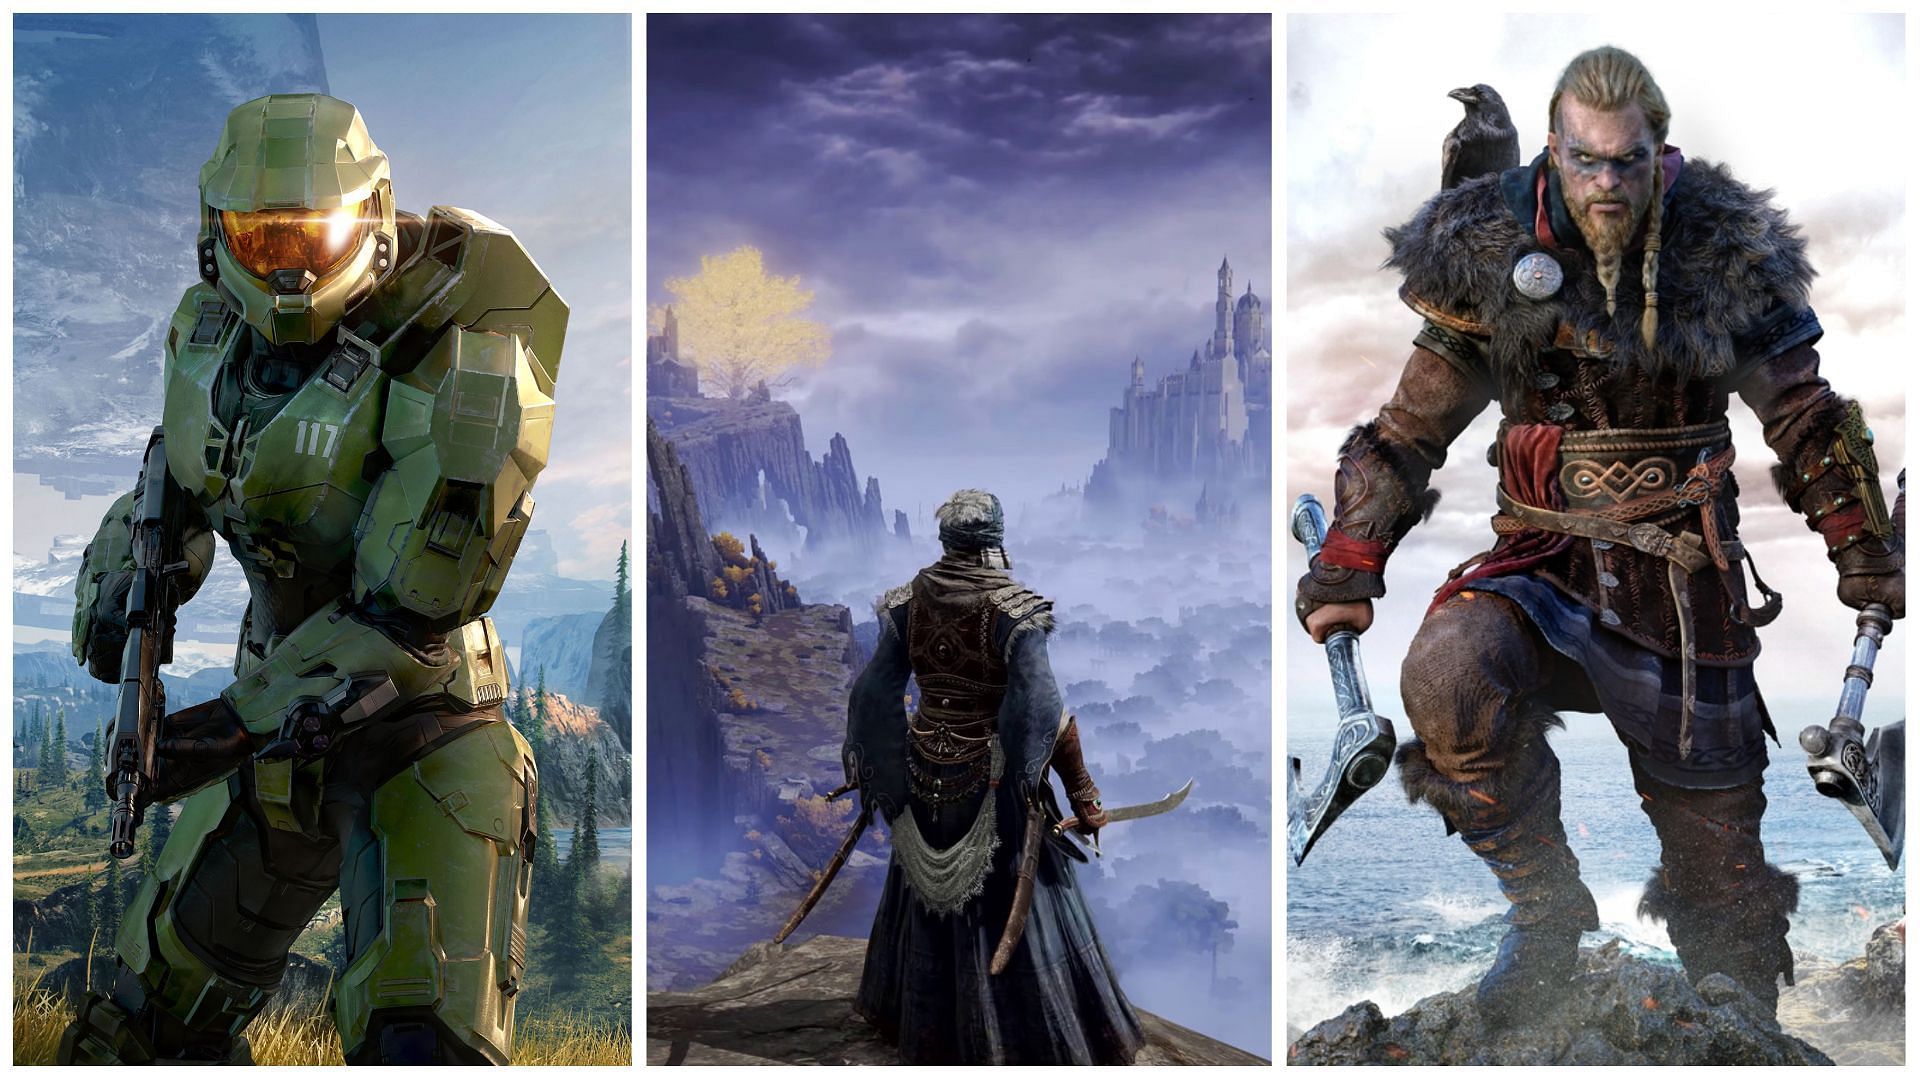 The Xbox Series X/S consoles have a comprehensive gallery of impressive games (Images via Xbox Game Studios, Bandai Namco Games and Ubisoft)